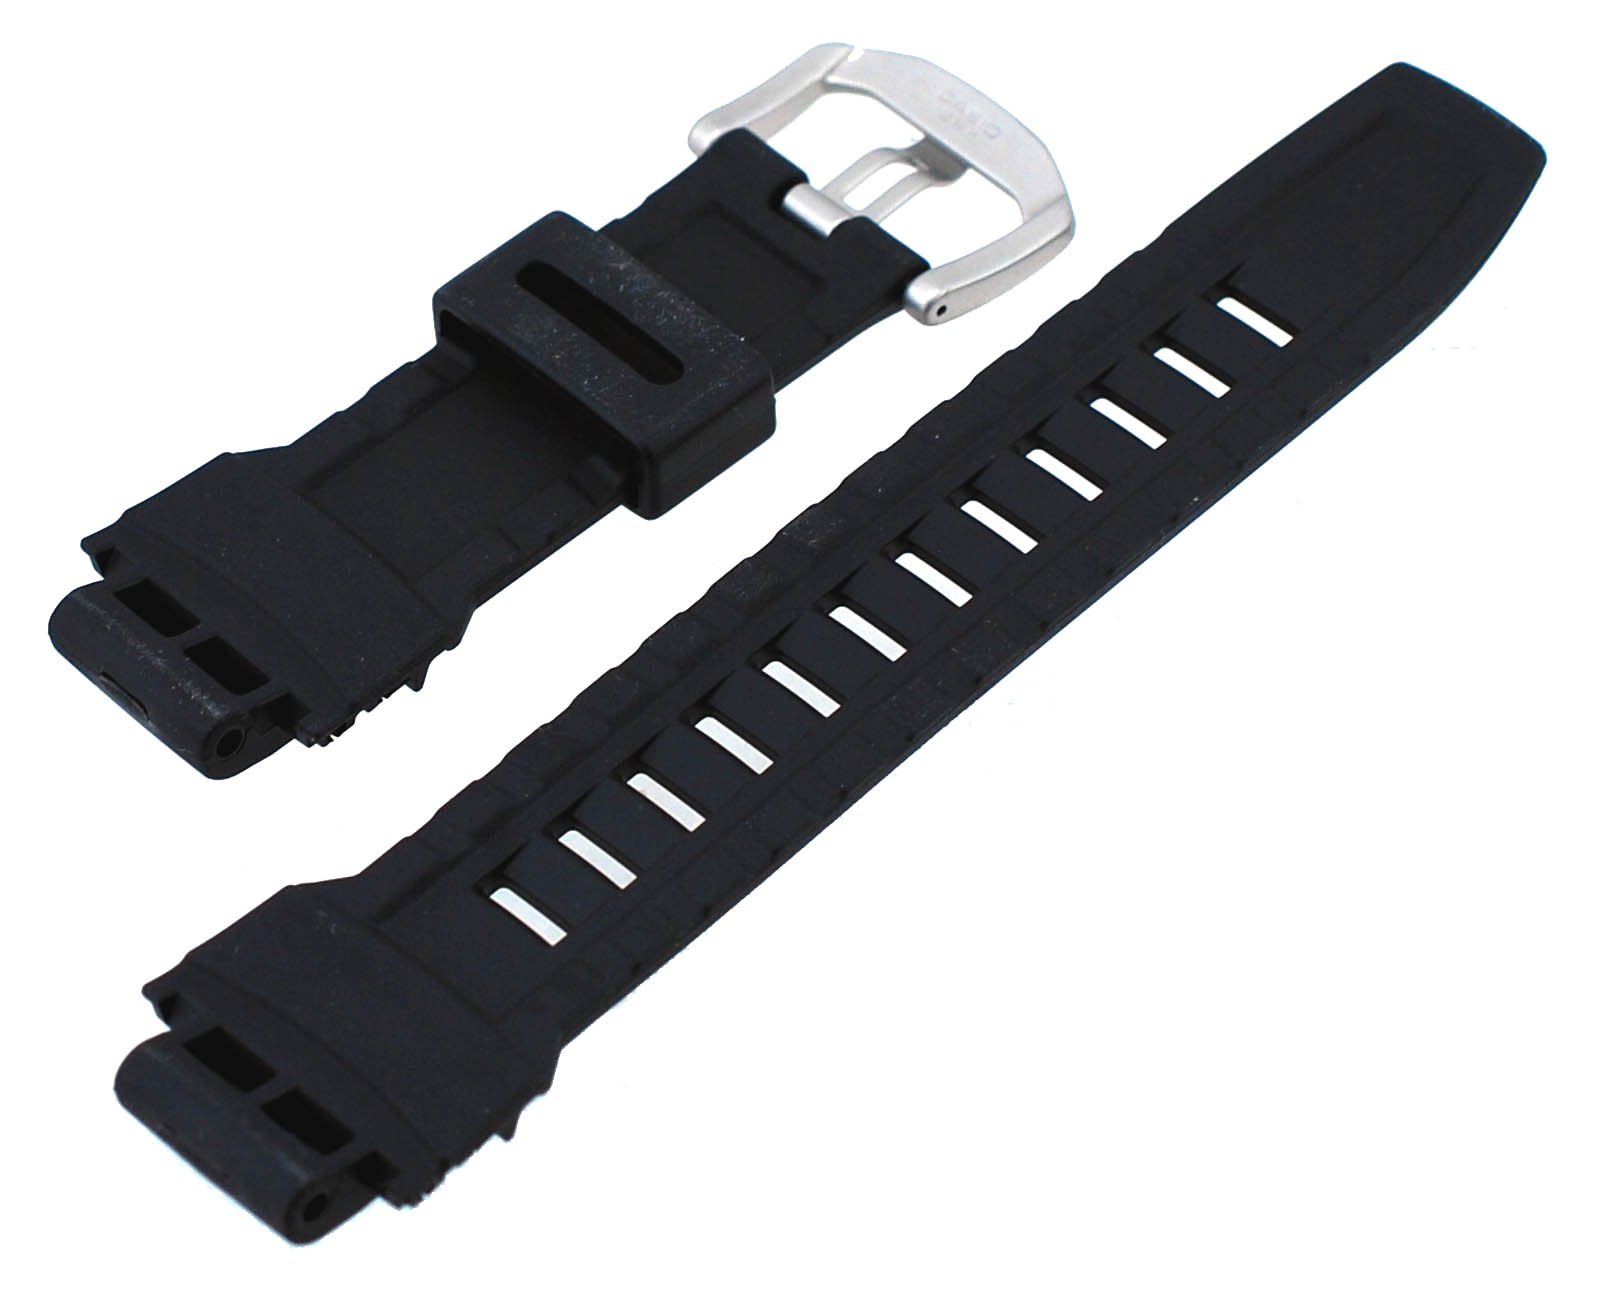 Casio 10350864 Genuine Factory Replacement Band for Pathfinder Watch - PAW-5000